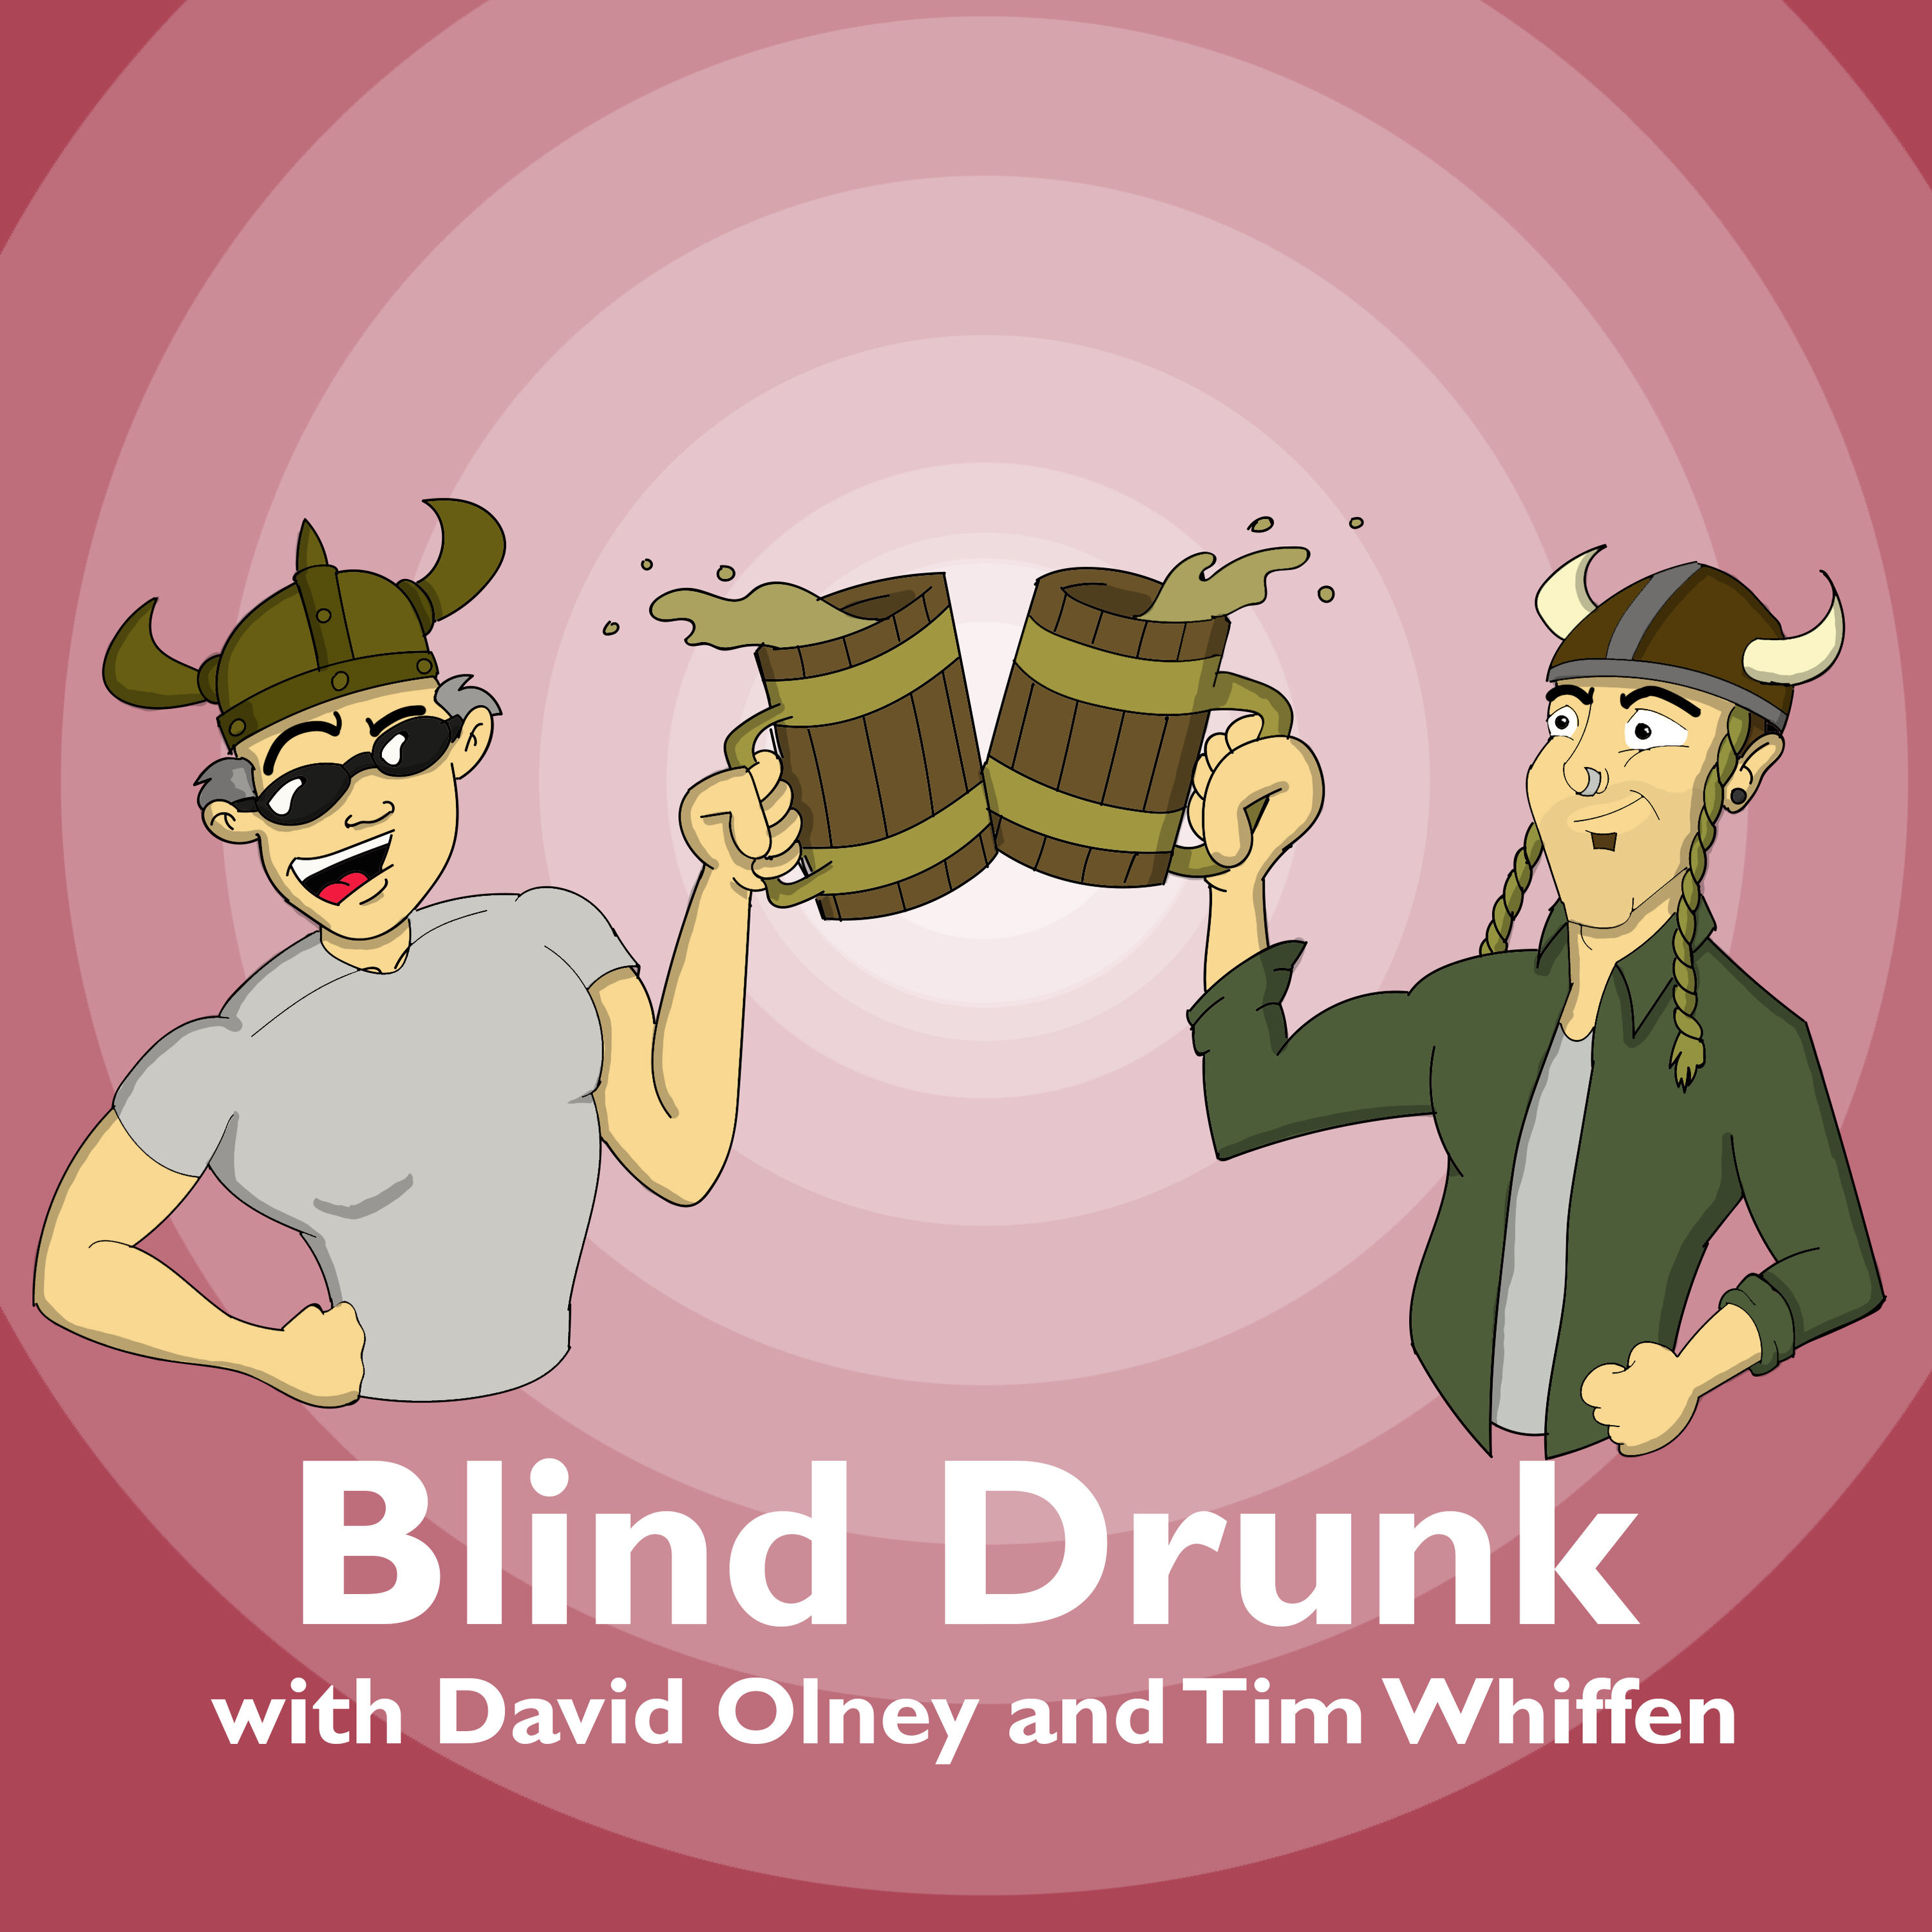 Spirited Conversations - An Introduction to Blind Drunk